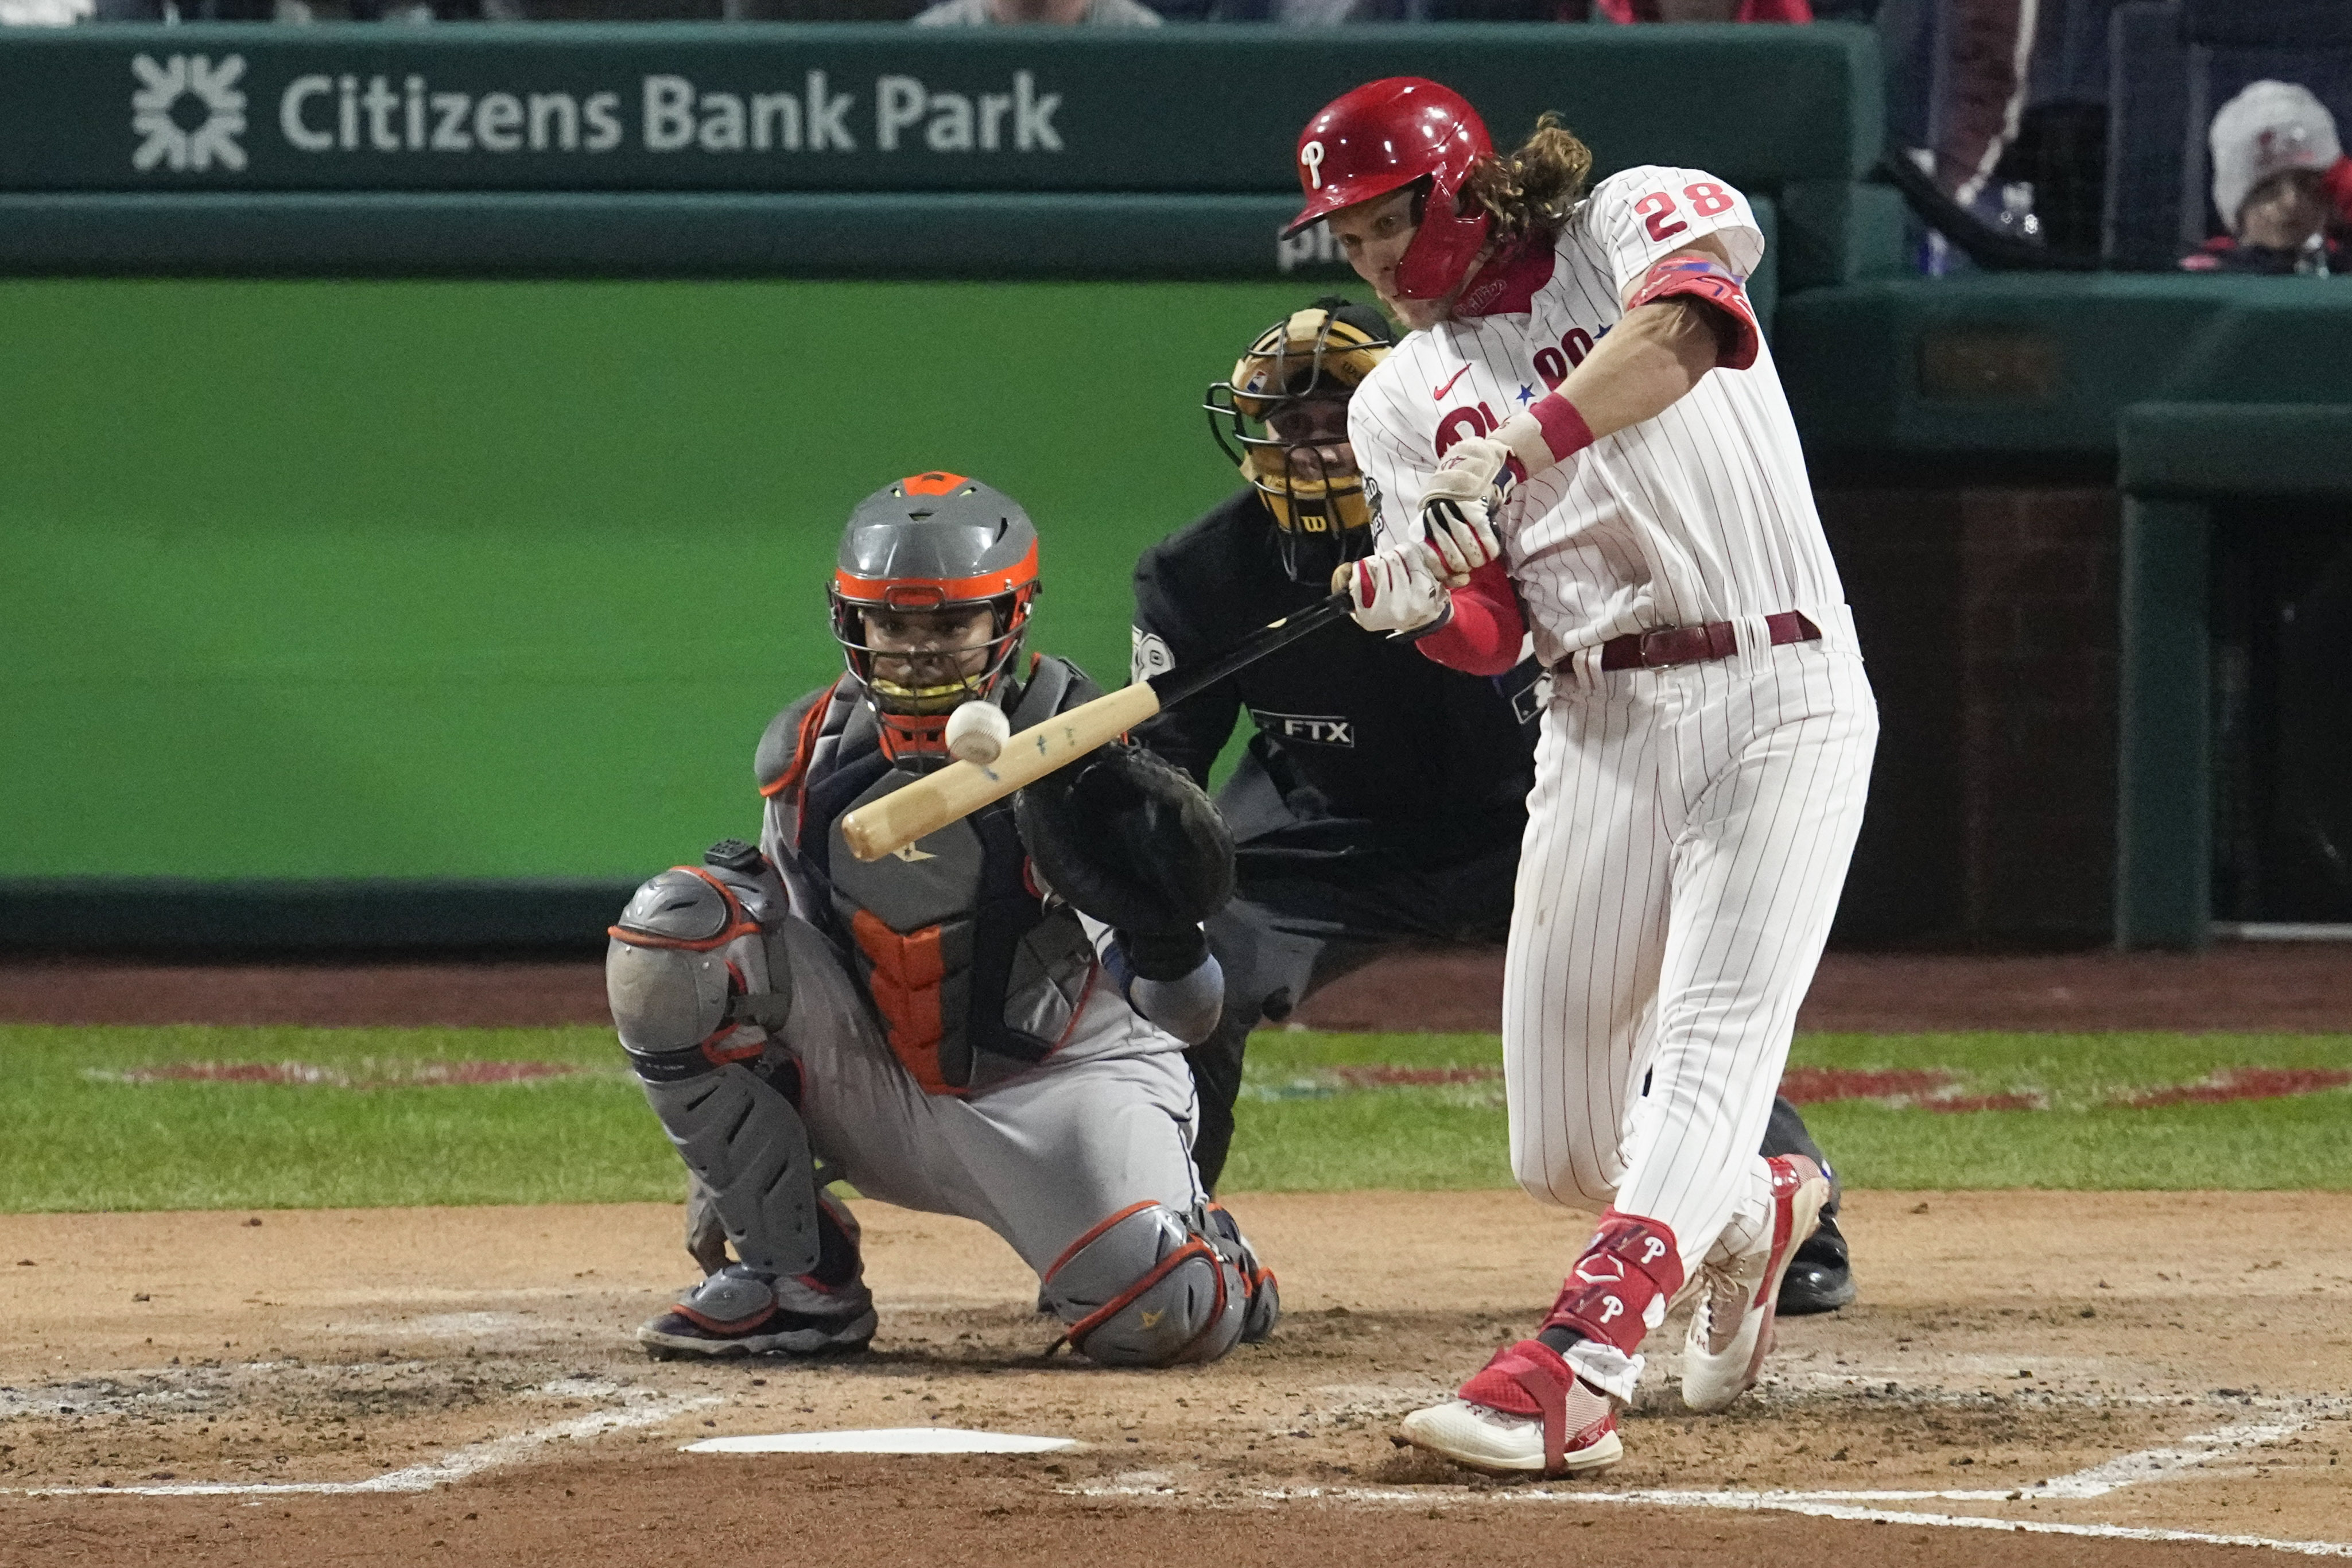 Phillies – Astros: Alec Bohm hits HR after Bryce Harper gave advice